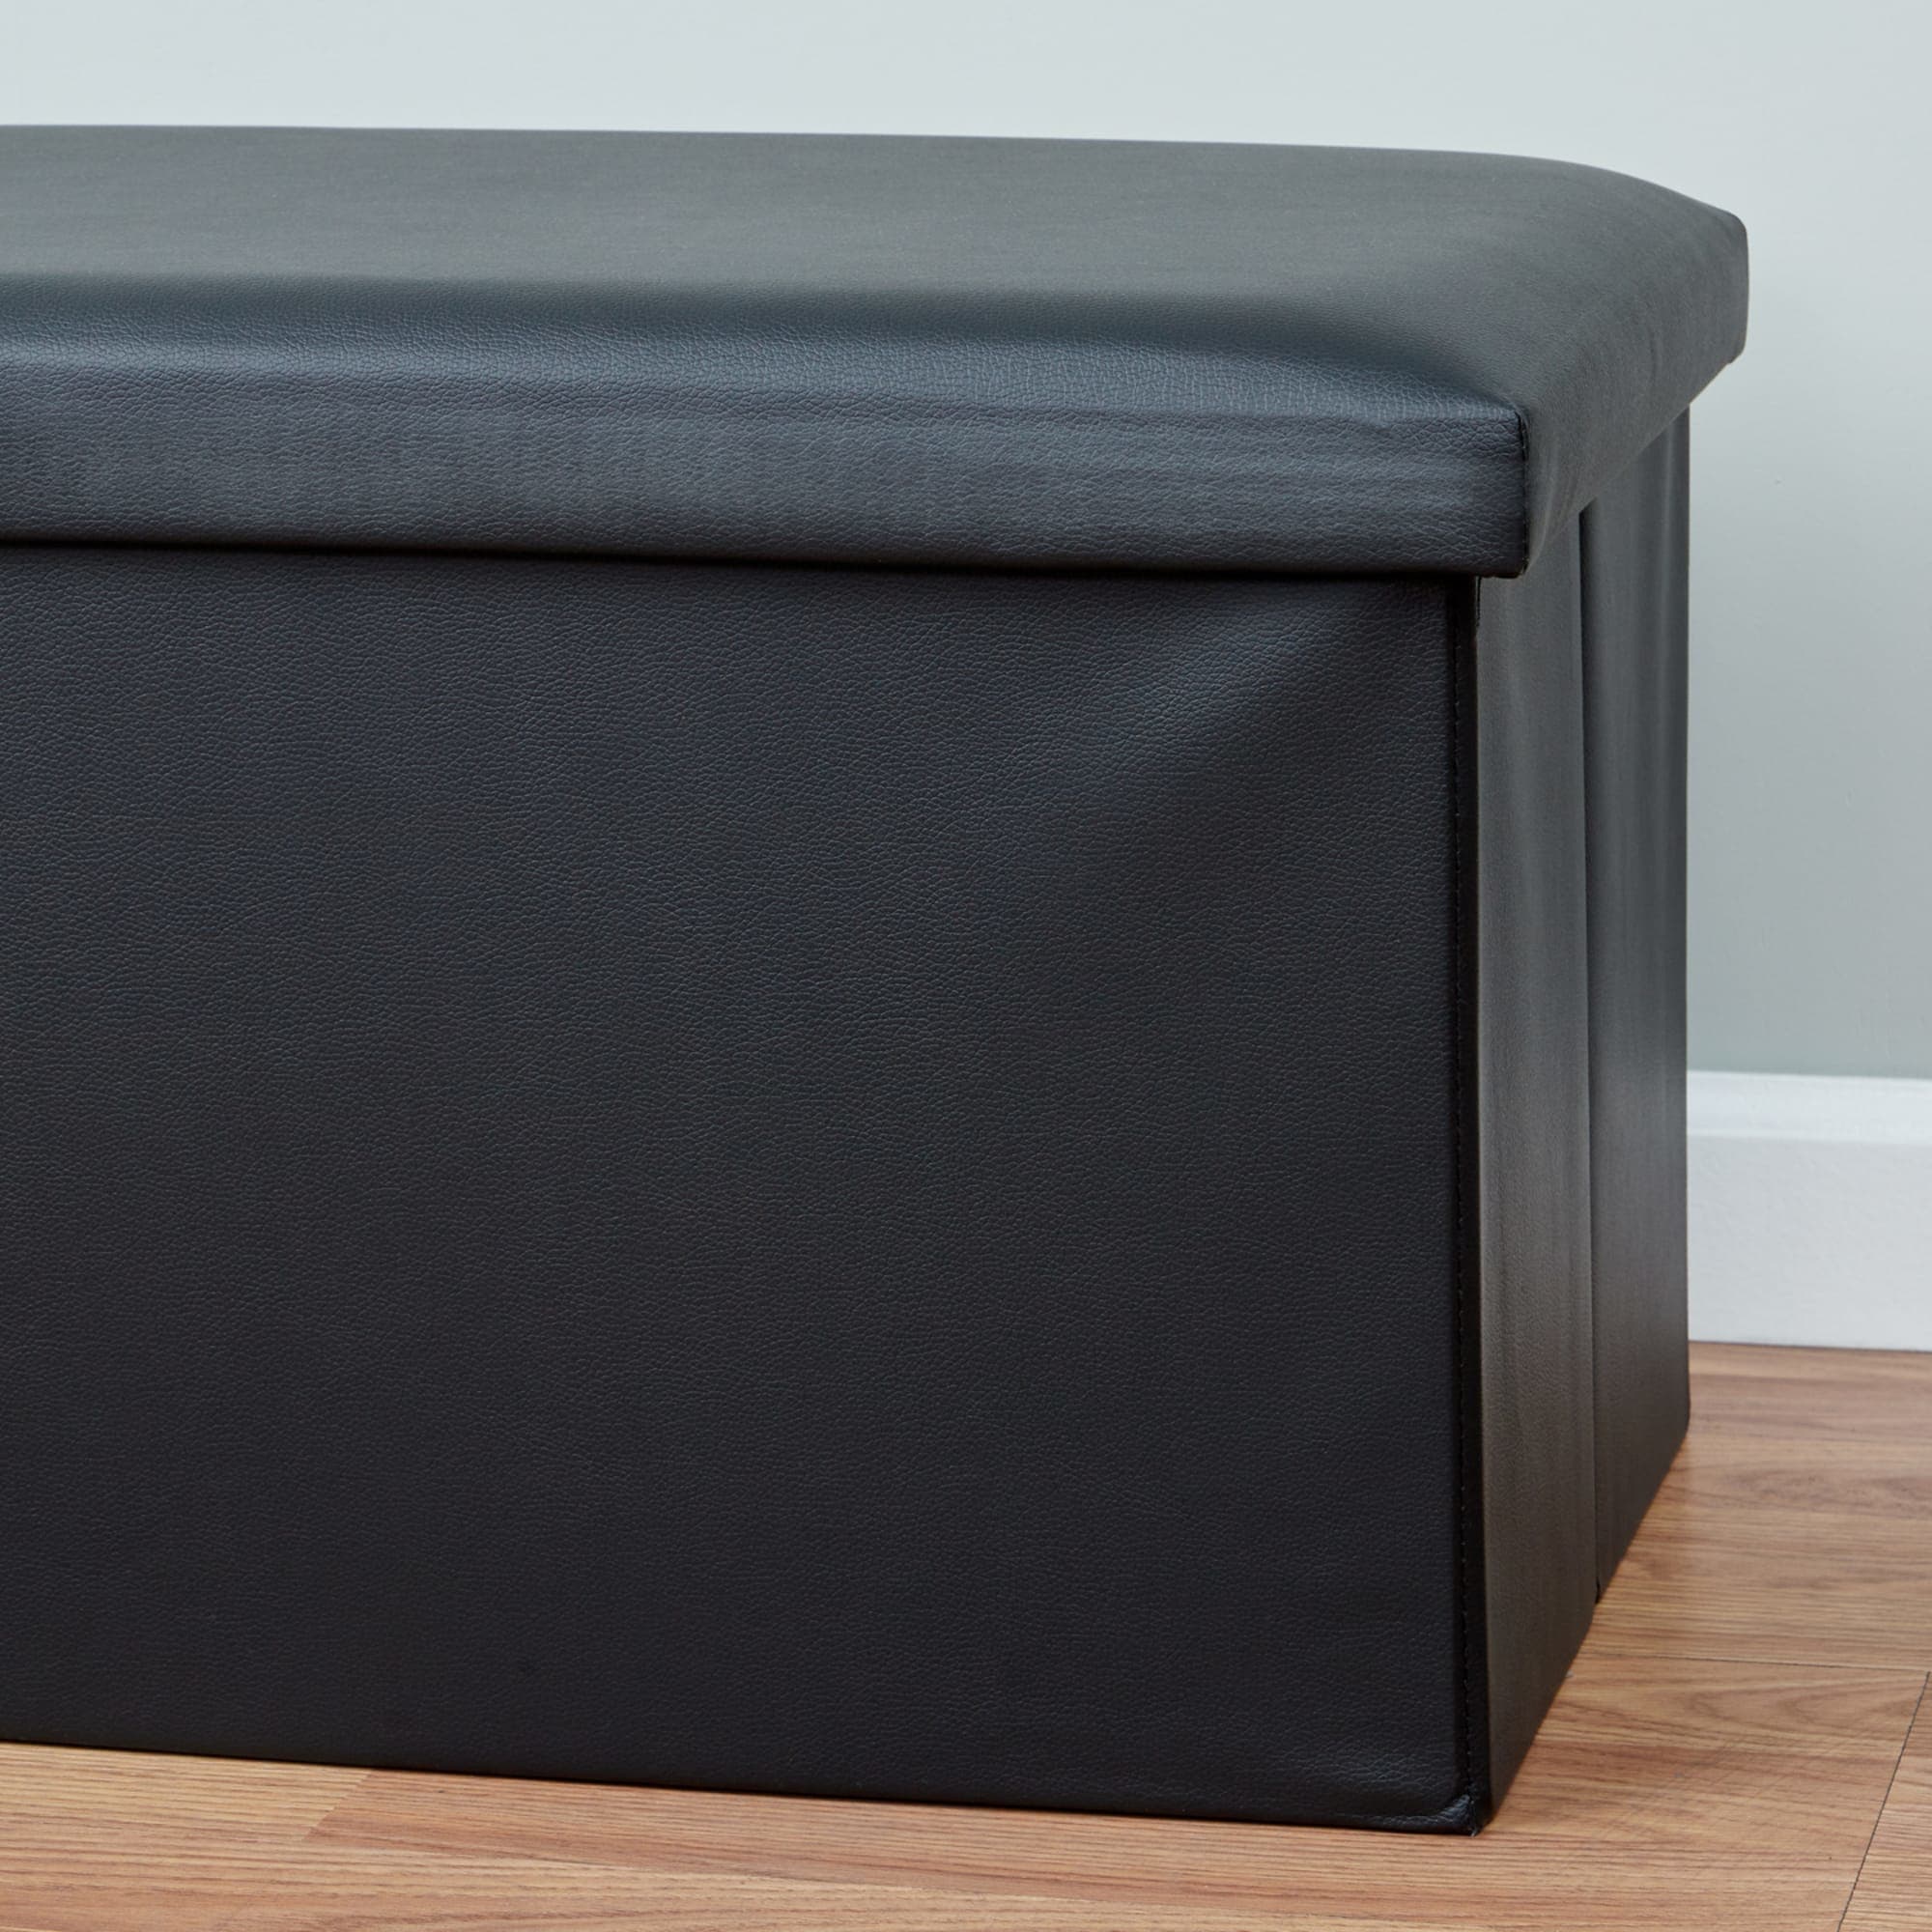 Home Basics Faux Leather Rectangular Storage Ottoman, Black $25.00 EACH, CASE PACK OF 4